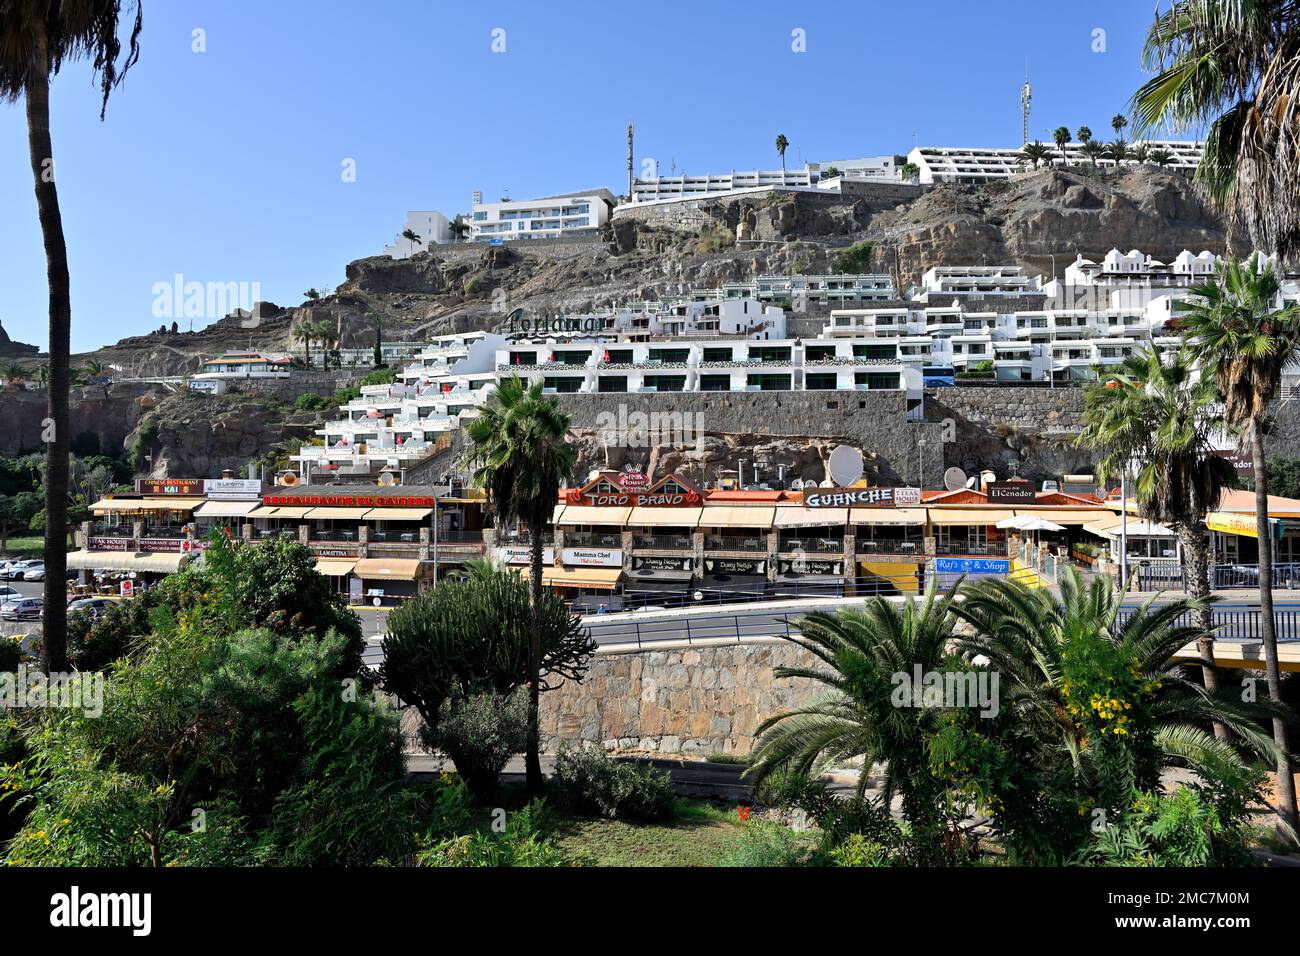 Tourist hotel complexes and shopping area on hillside in town of  Arguineguín, Gran Canaria Stock Photo